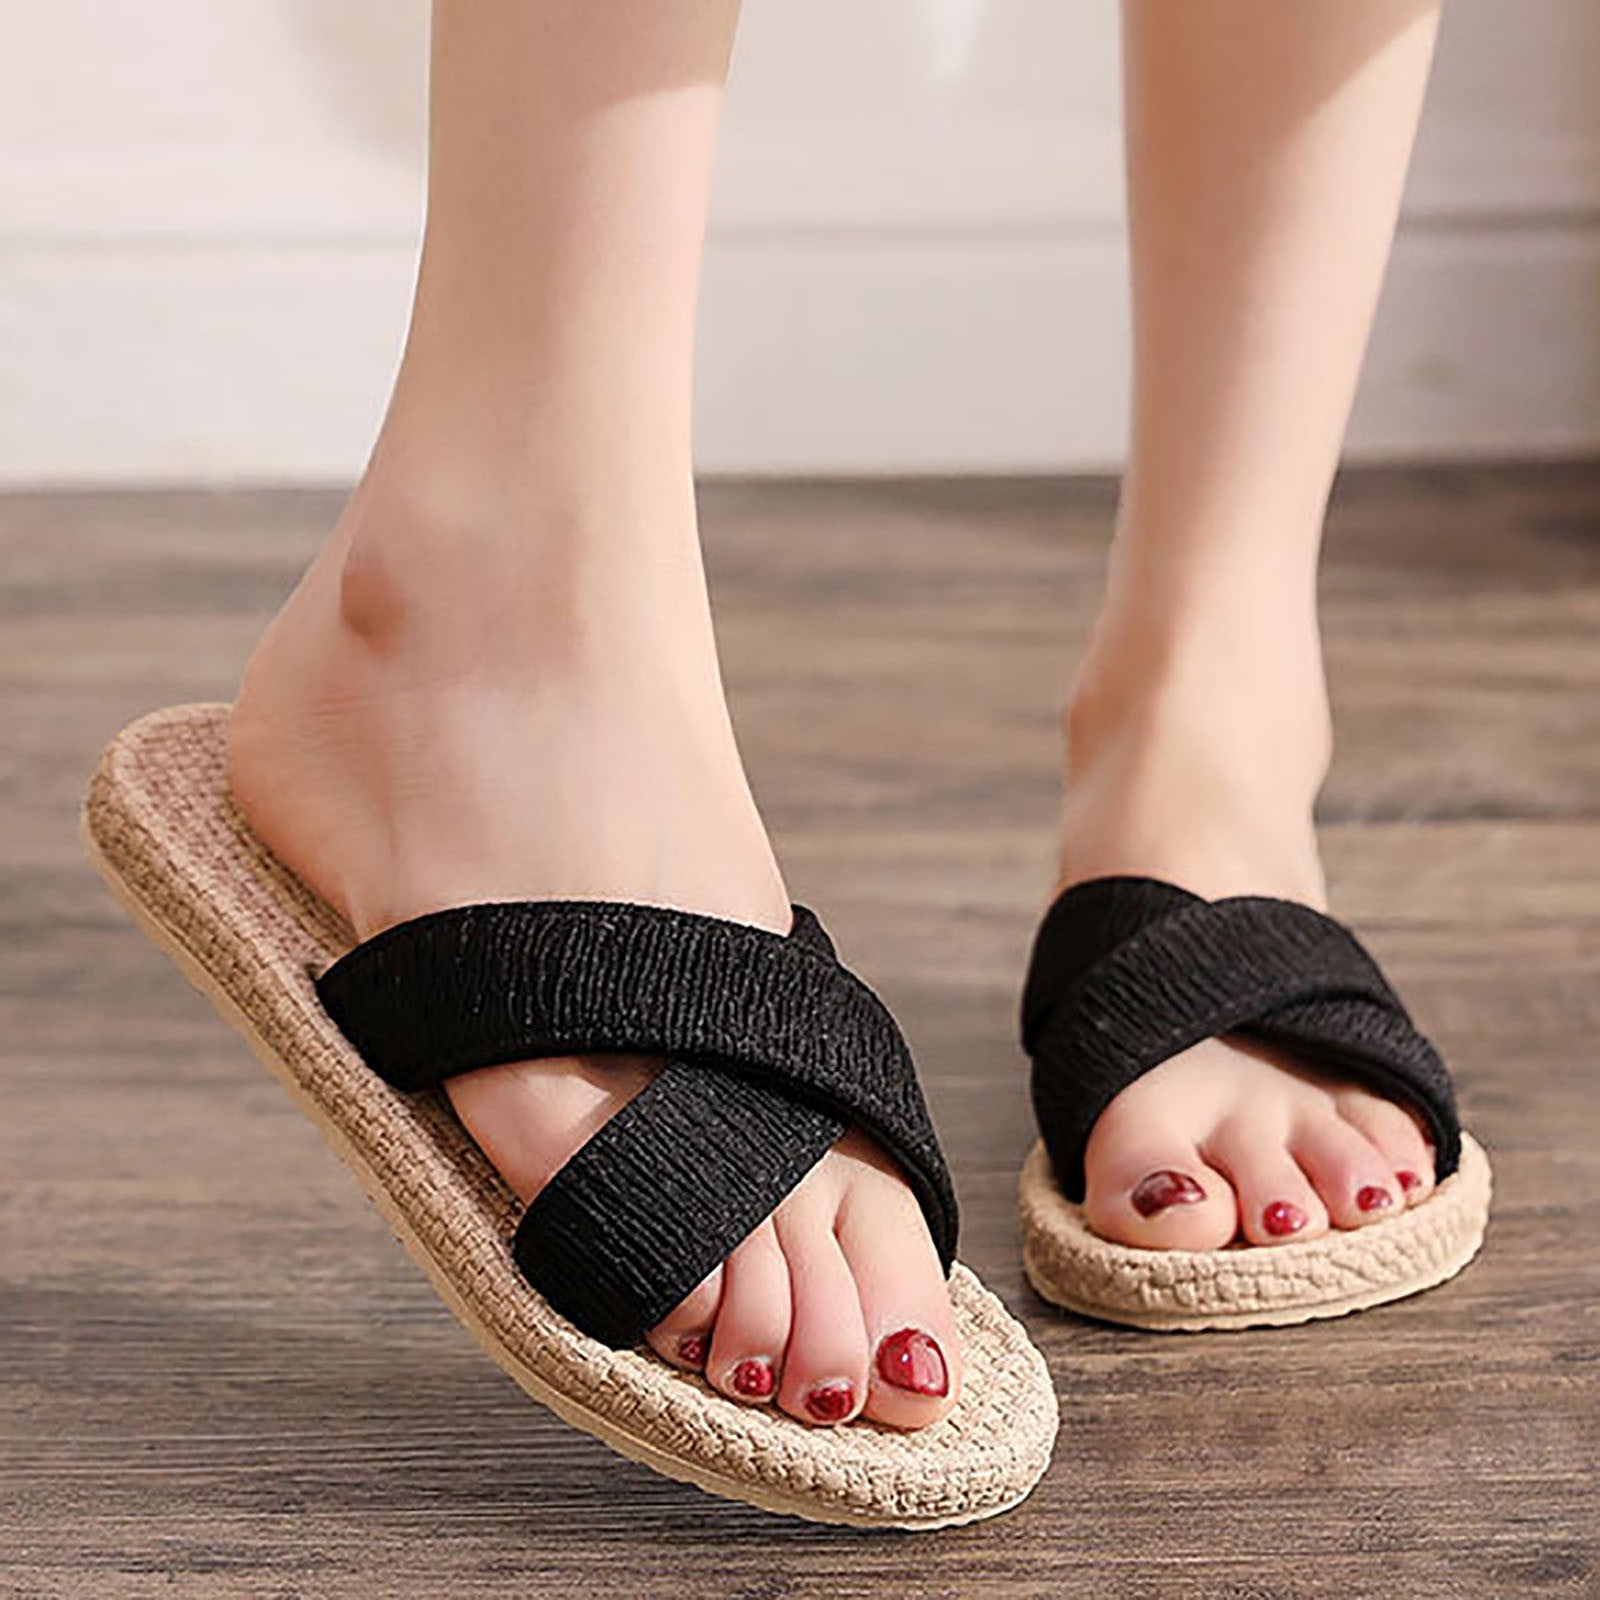 8 Slippers From Target That Are Cozy And Cool | HuffPost Life